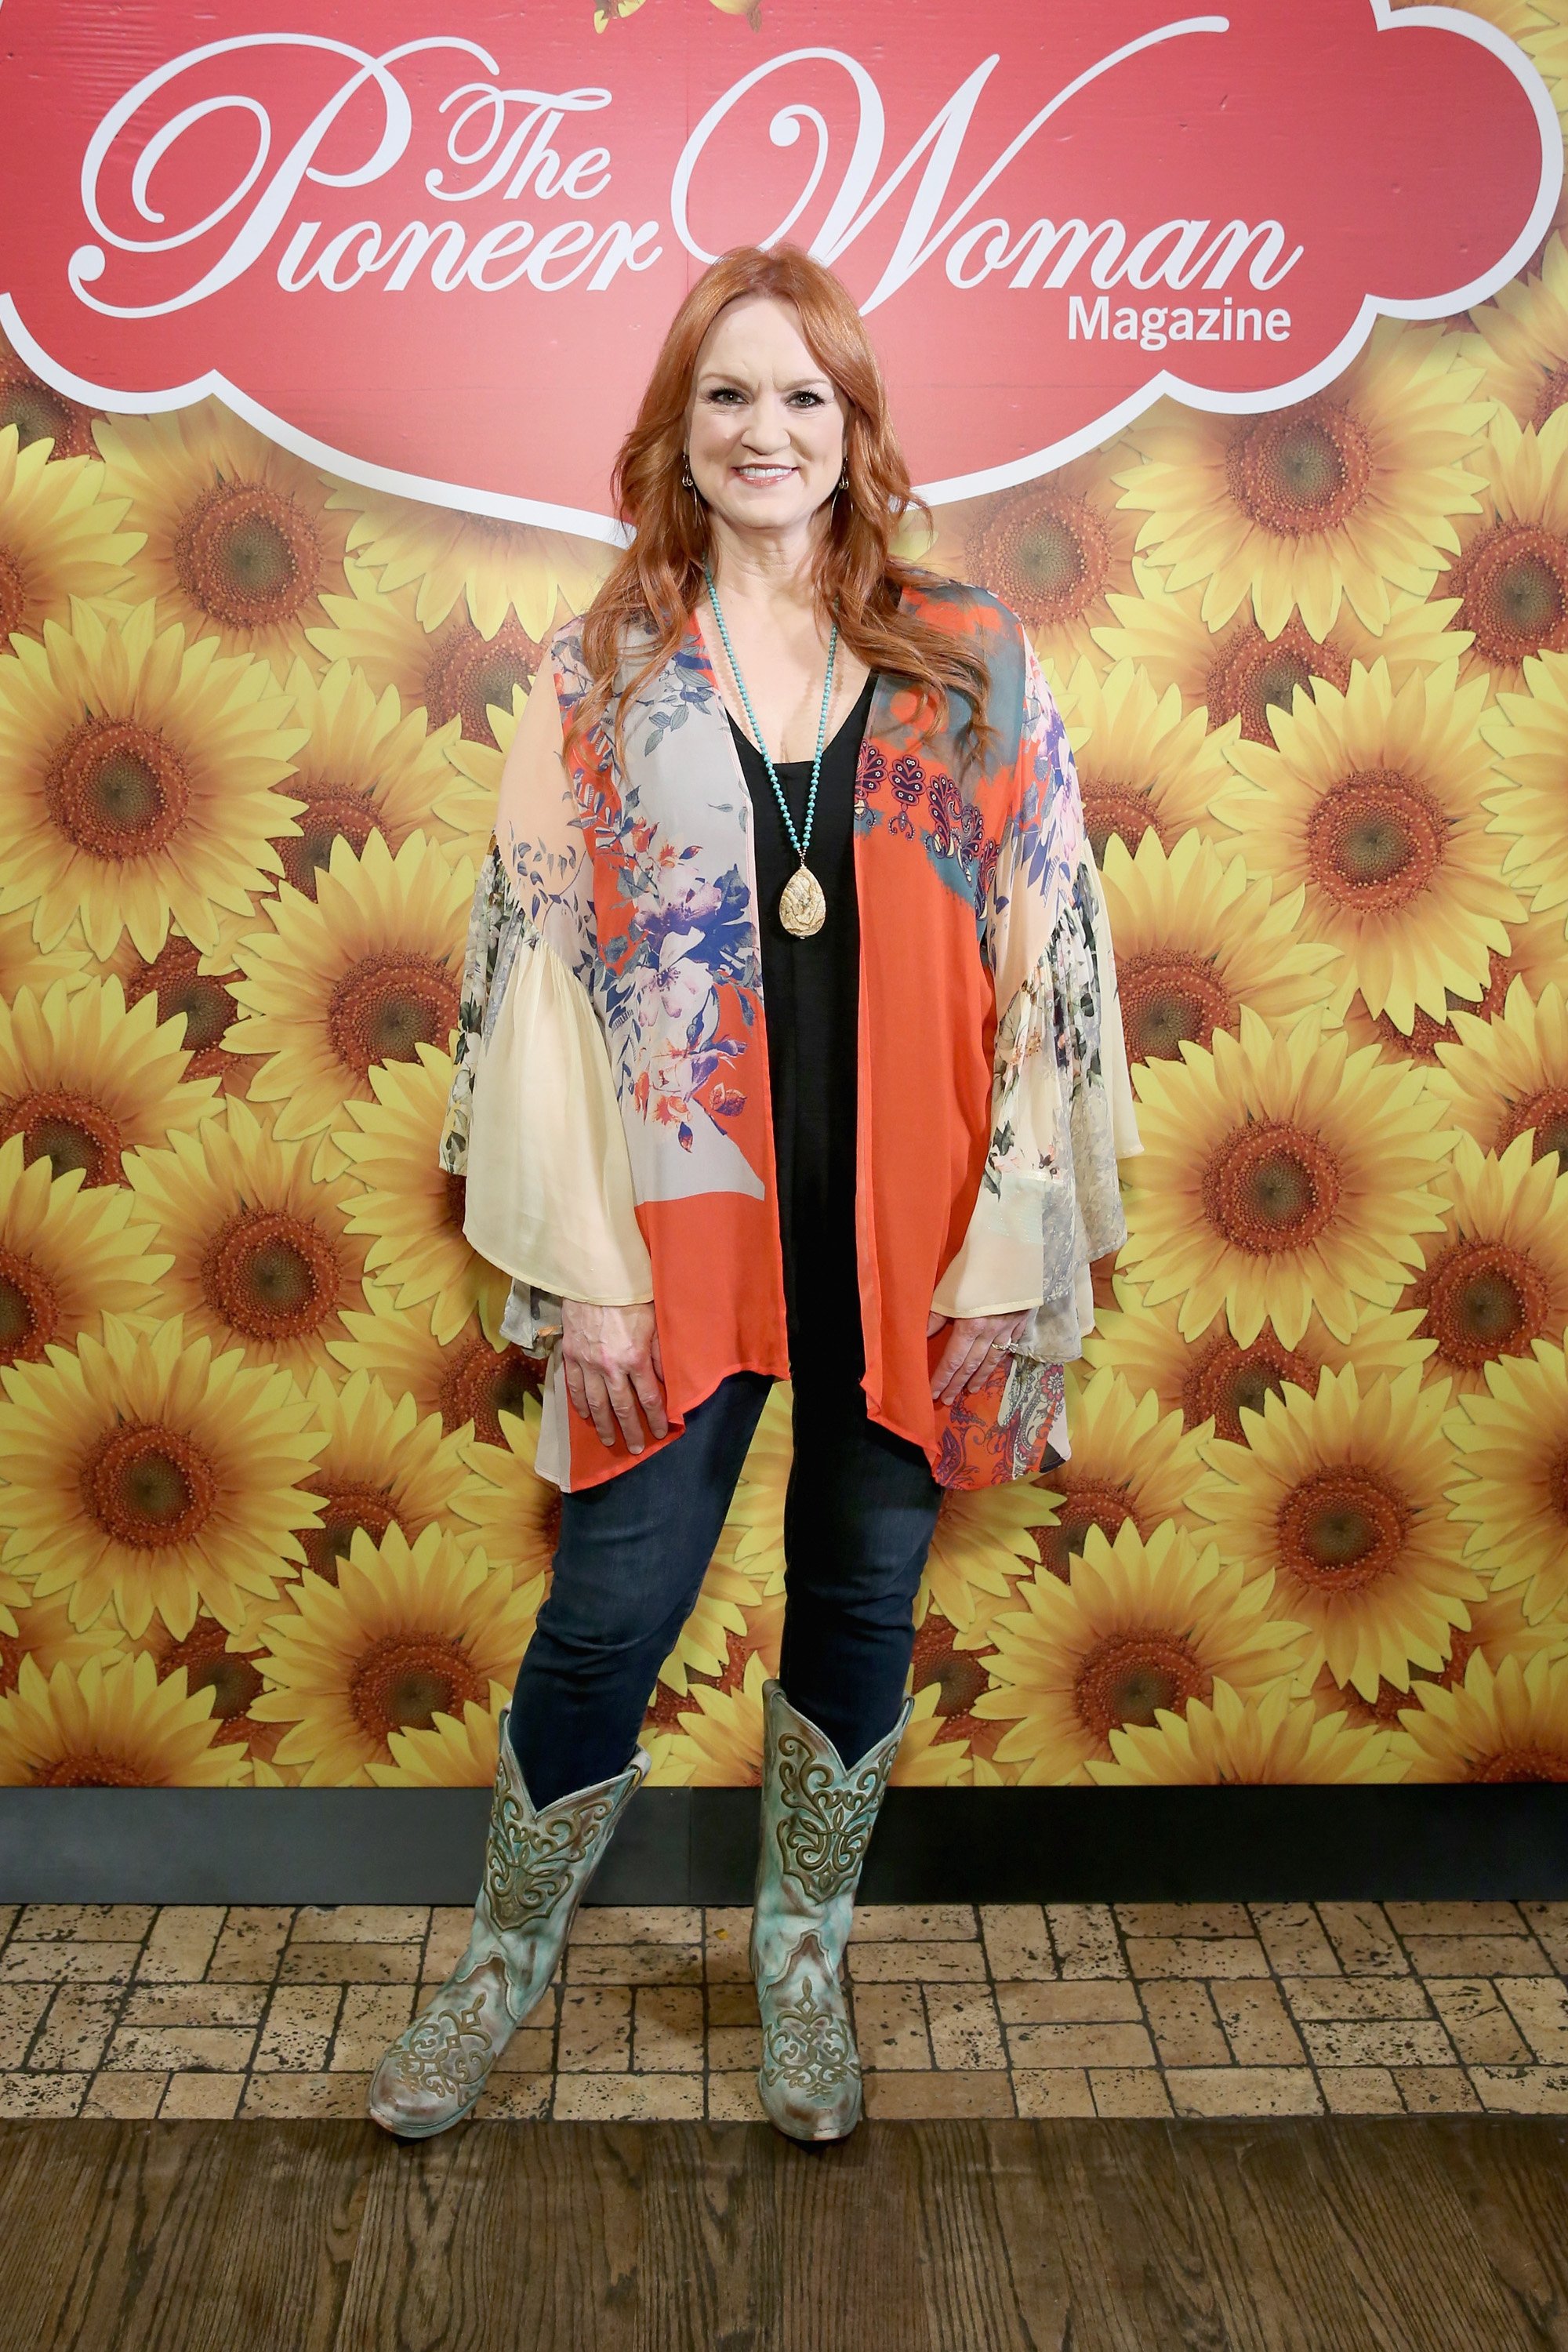 Ree Drummond attends The Pioneer Woman Magazine Celebration with Ree Drummond on June 6, 2017, in New York City. | Source: Getty Images.